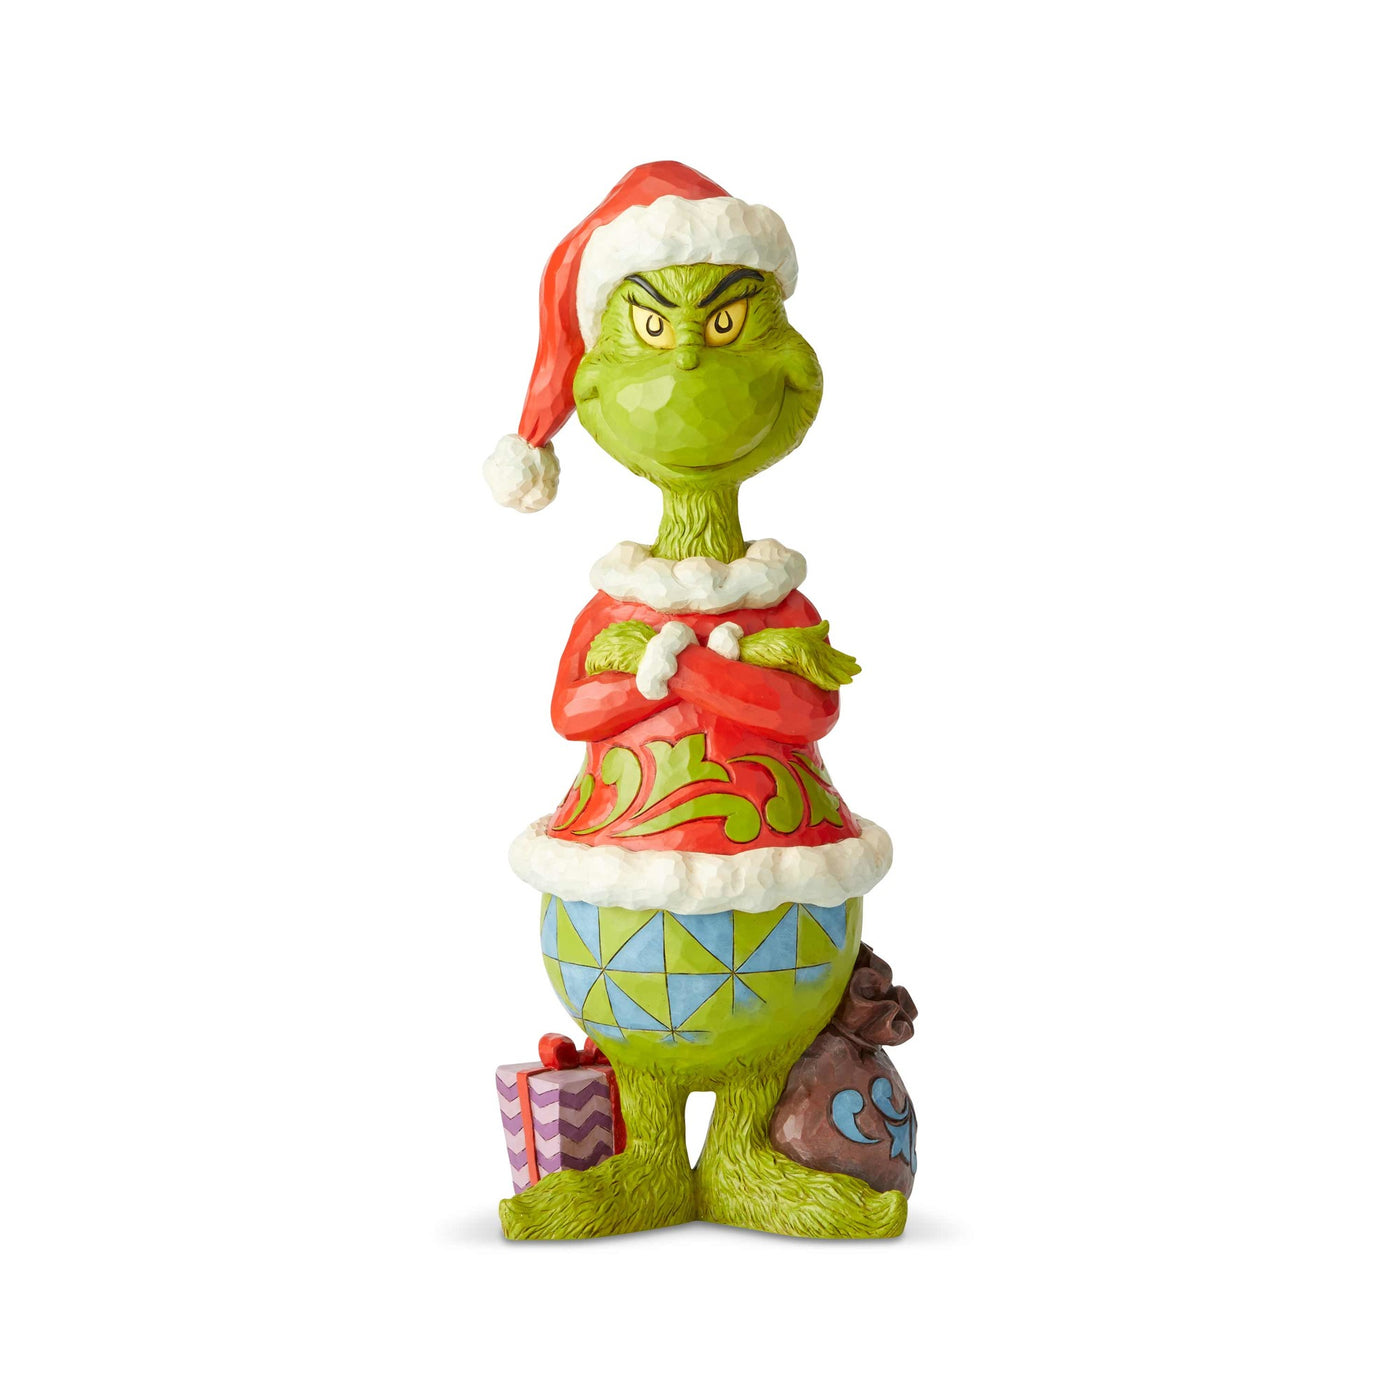 Jim Shore Grinch Statue With Arms Folded Figurine New with Box